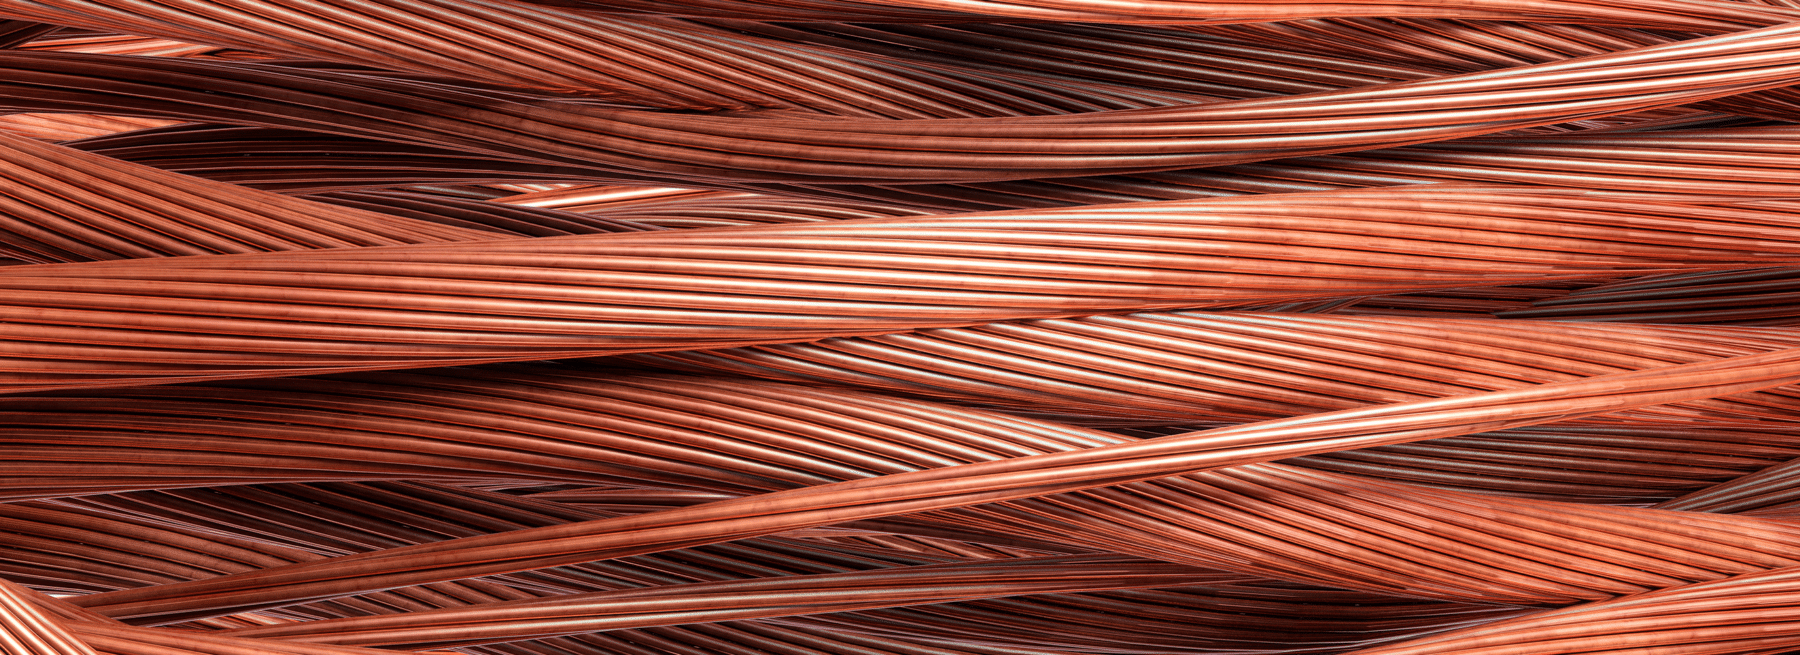 rise of copper theft